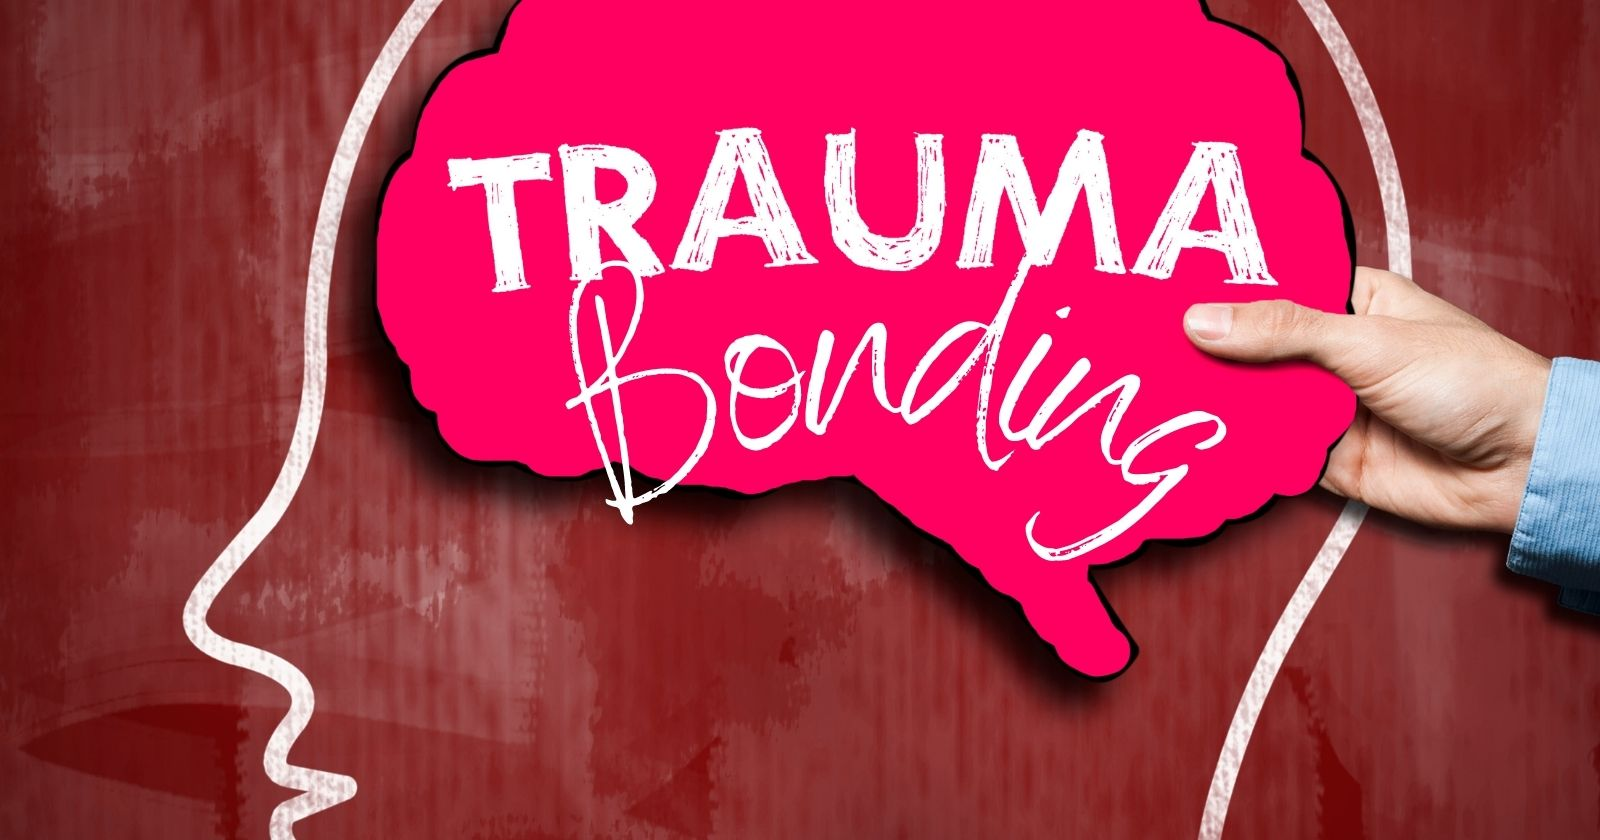 Signs of trauma bonding

Shape of face and brain and Text written over brain "Trauma Bonding"